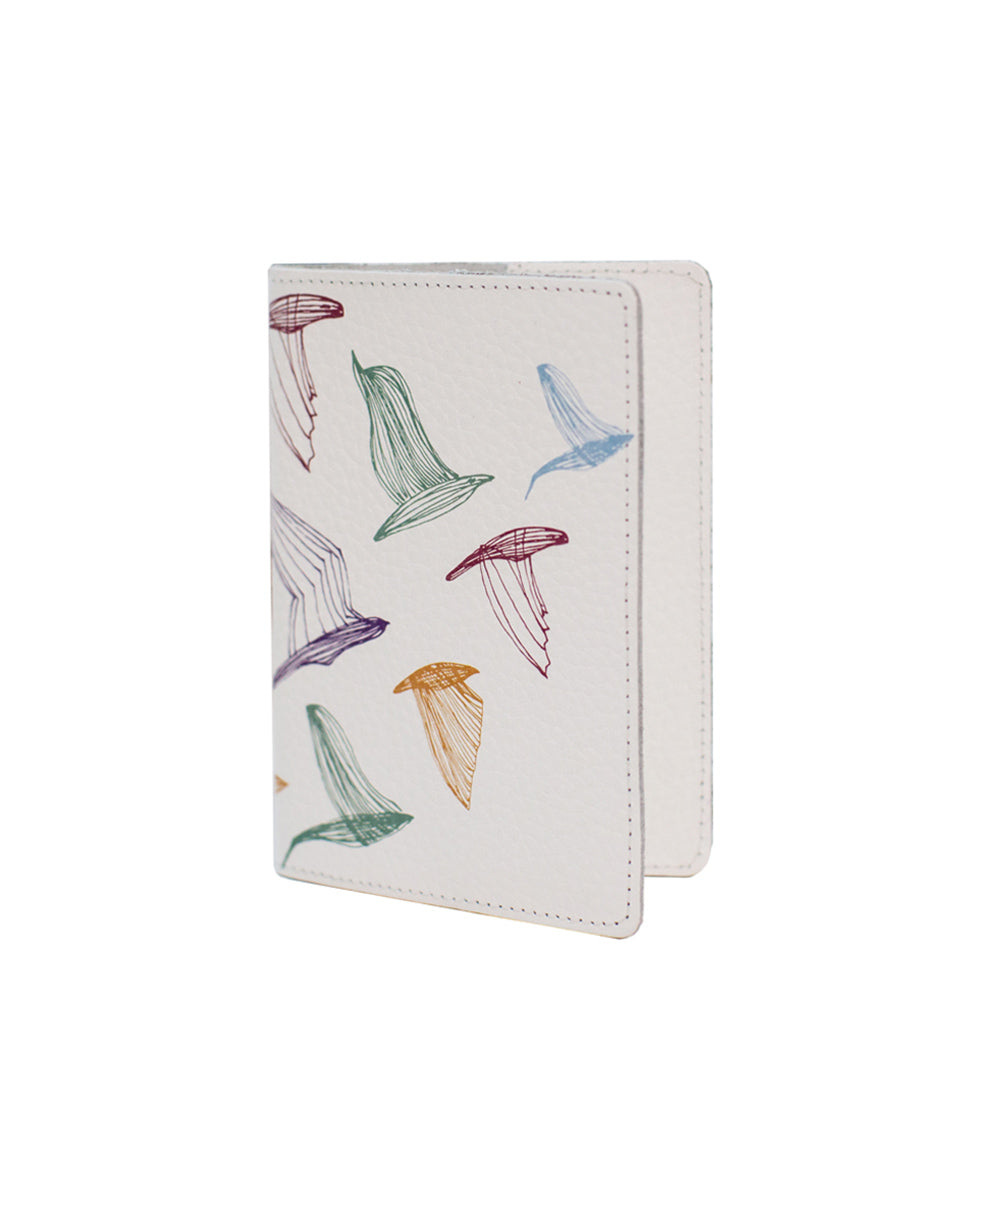 Printed Birds Leather Passport Cover